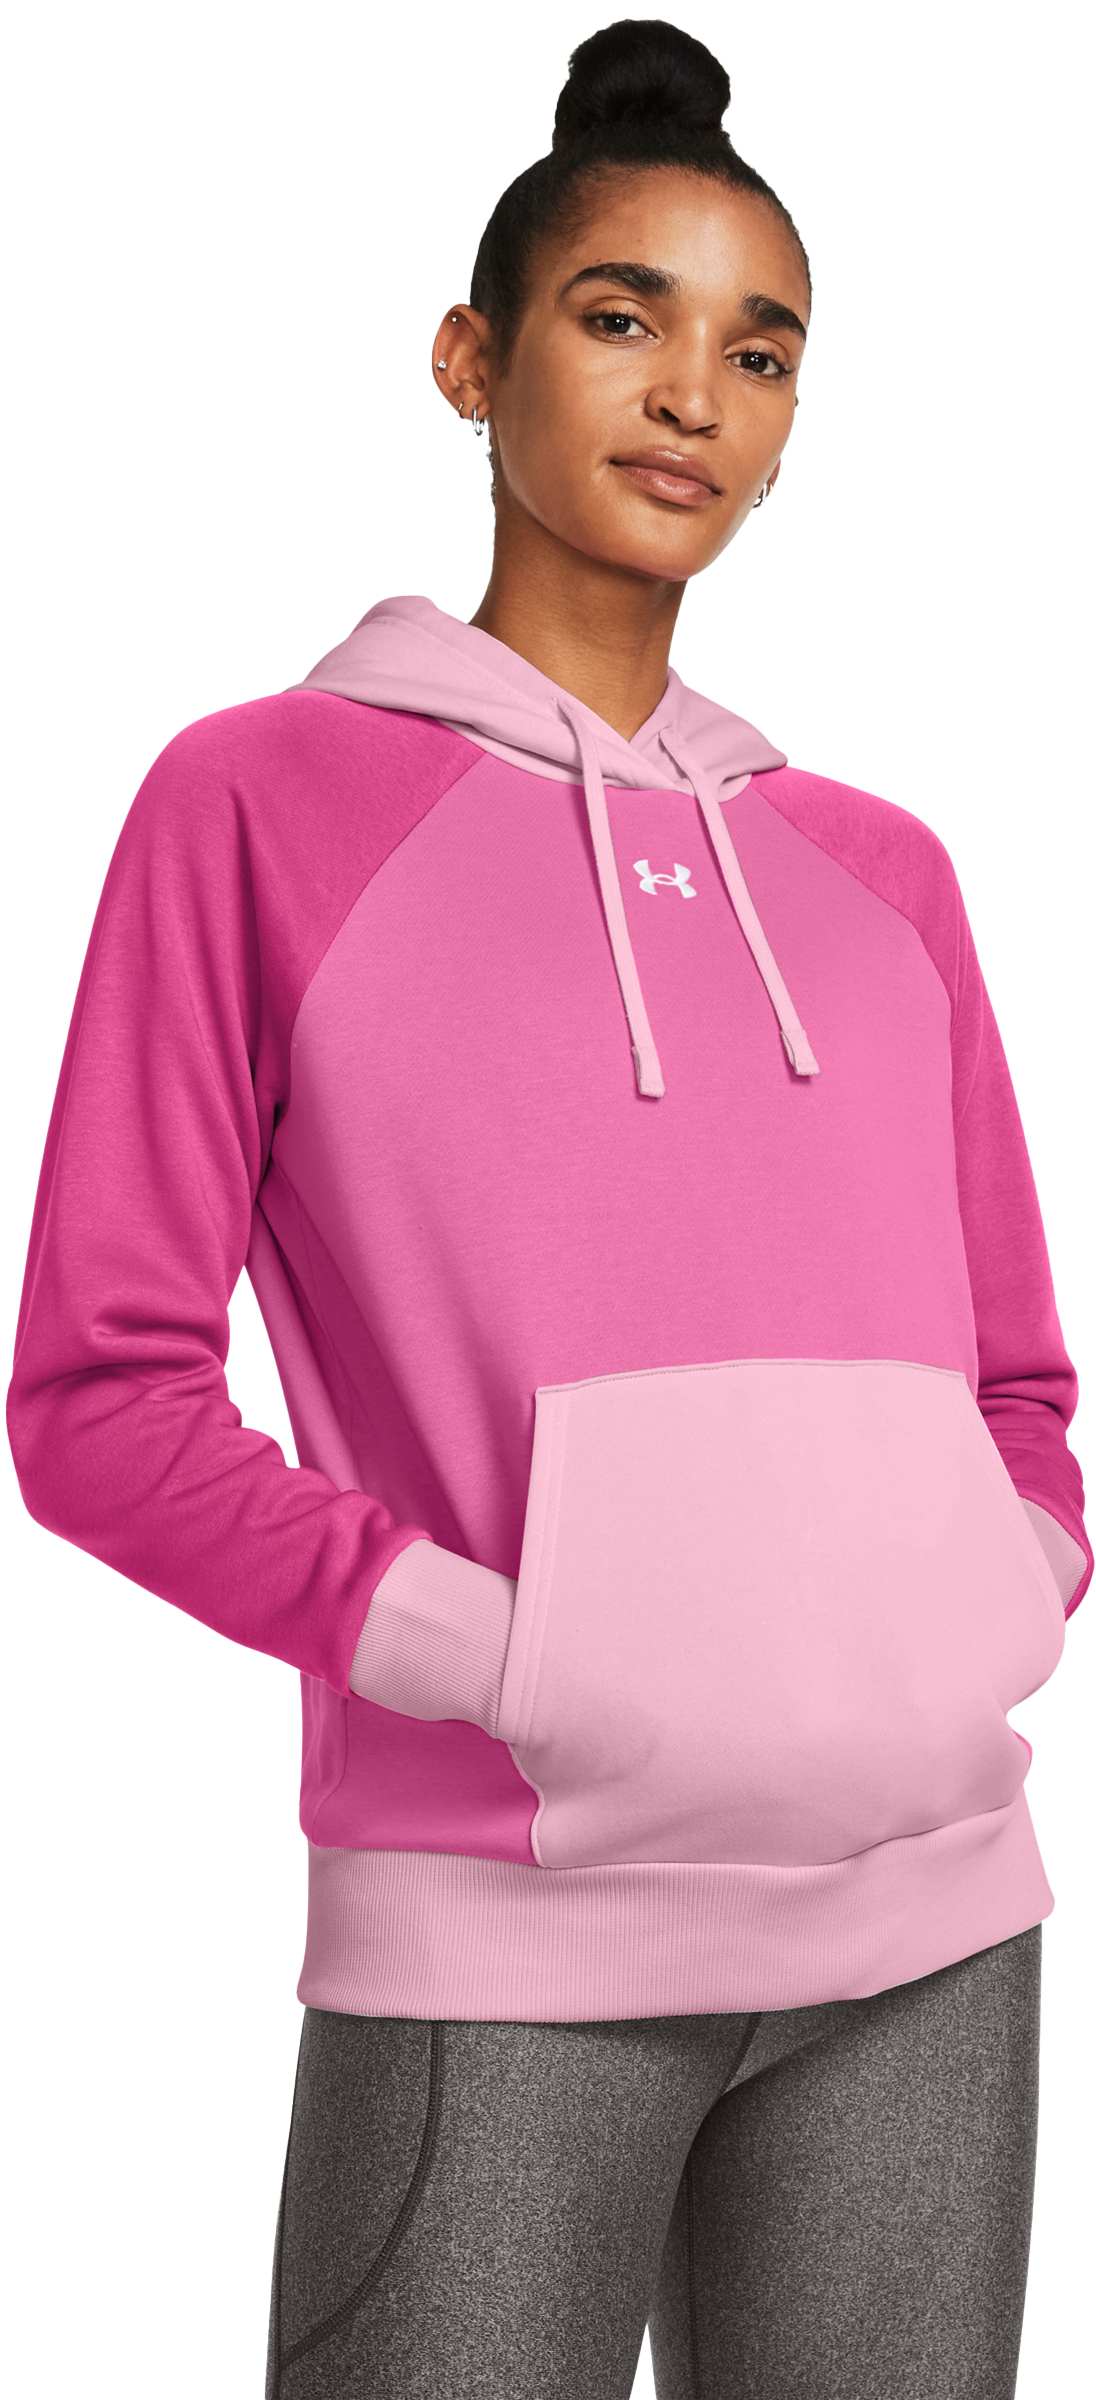 Under Armour Rival Fleece Joggers for Ladies